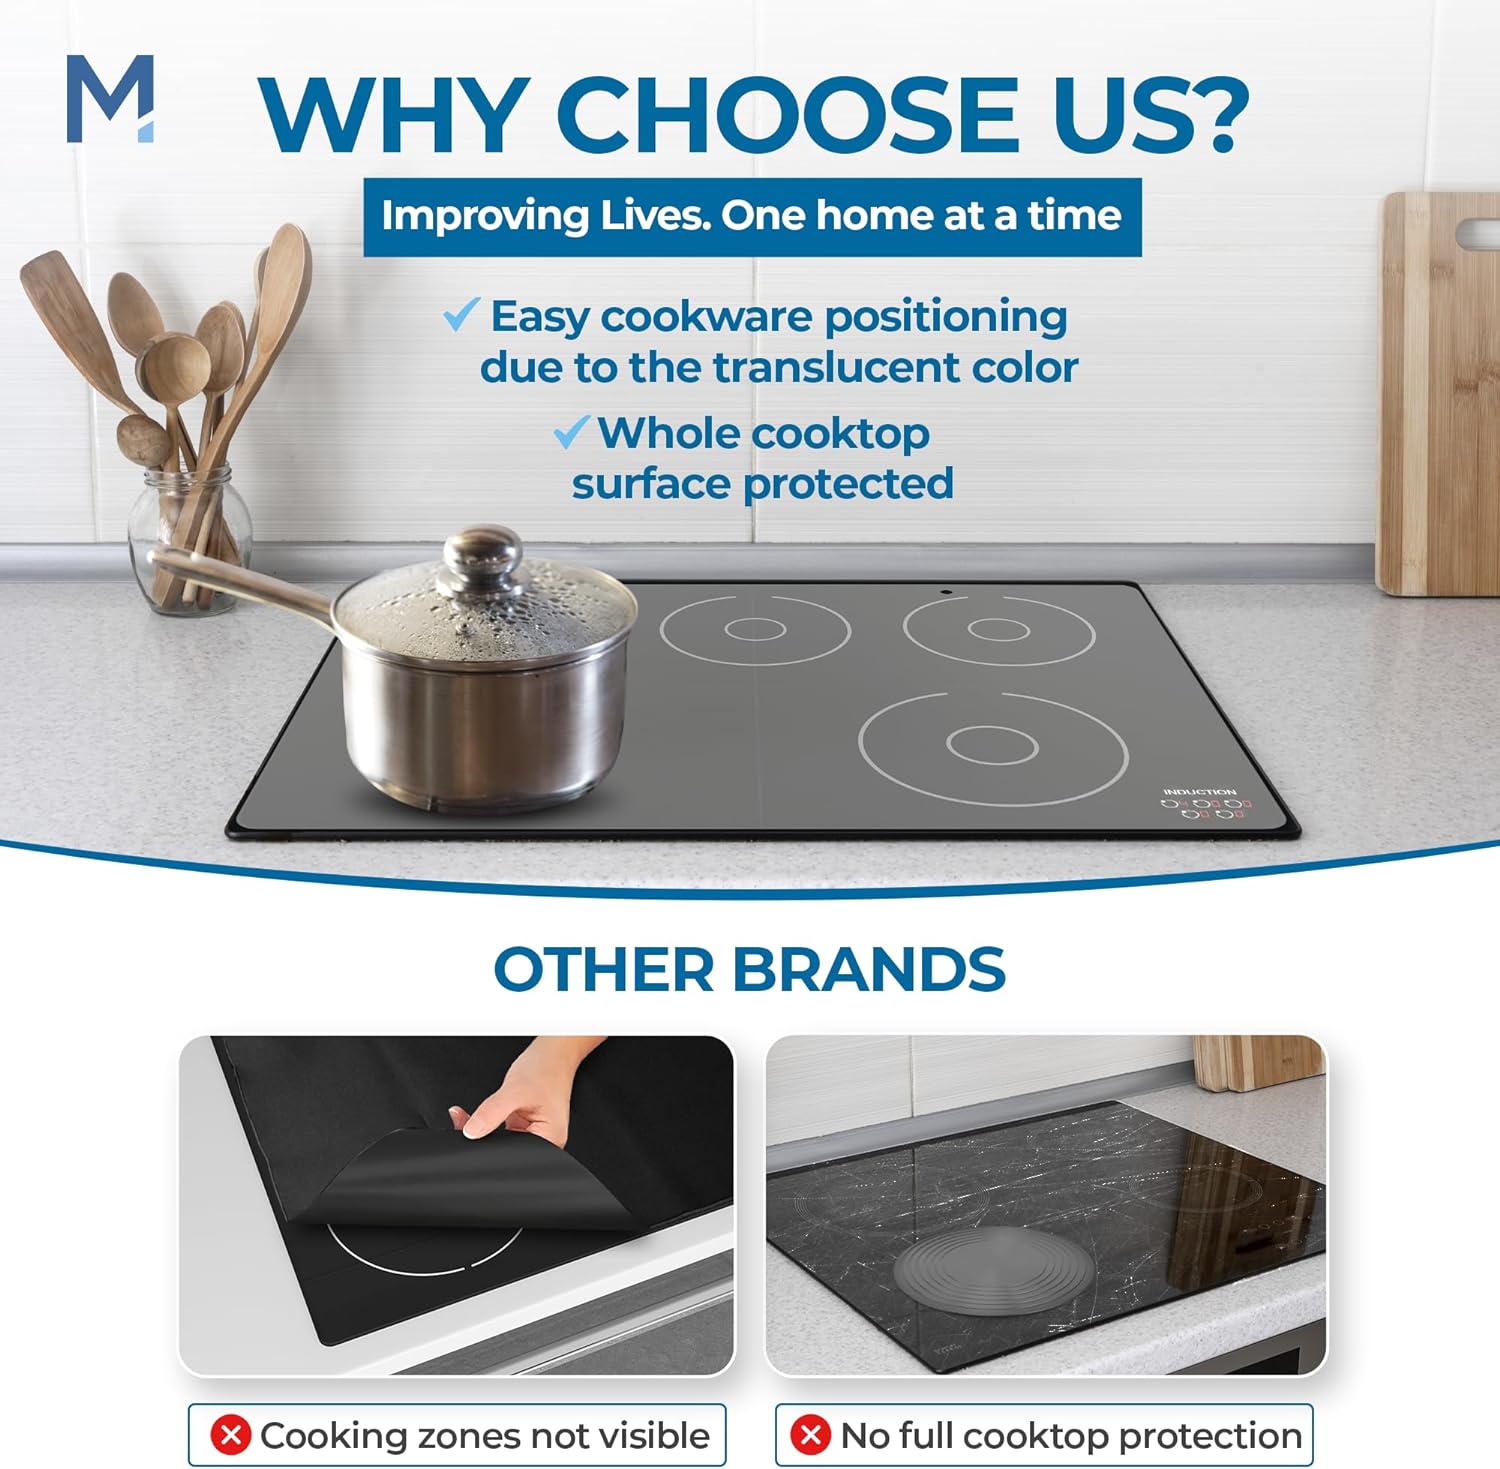 Meliusly® Platinum Silicone Induction Cooktop Mat (30.7 x 20.8'') - Induction  Cooktop Protector Cover